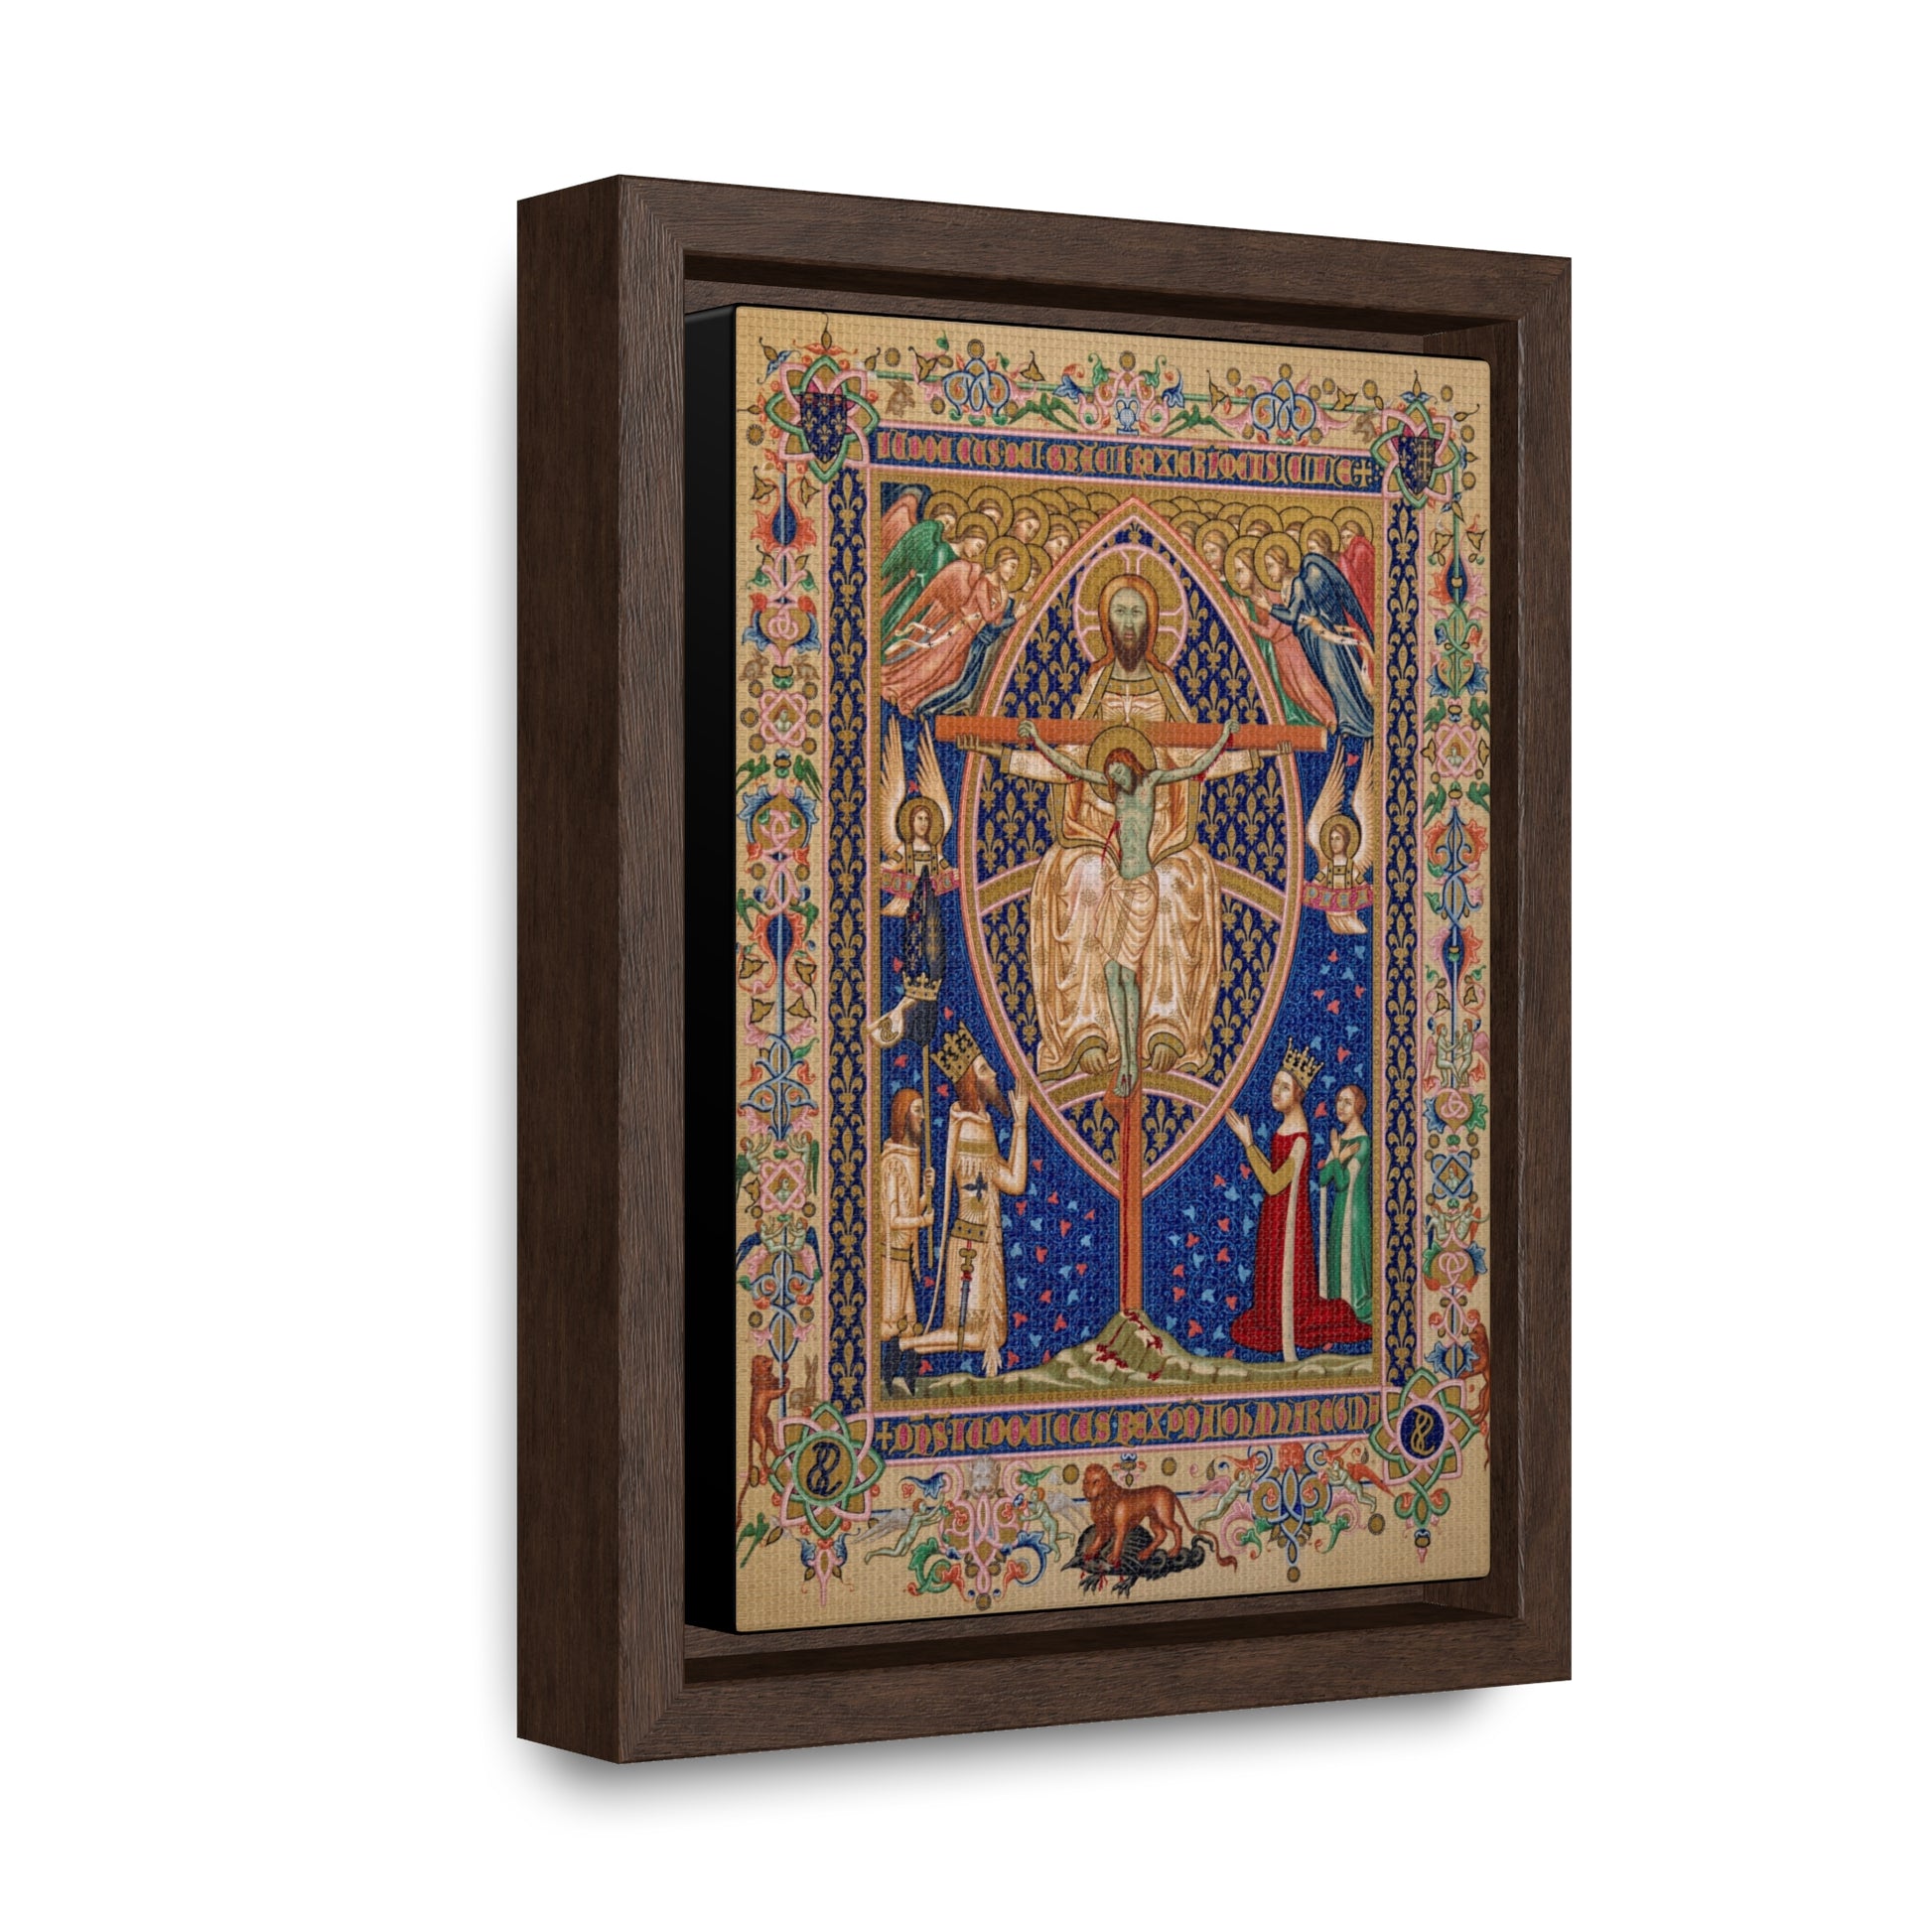 Order of the Holy Spirit Manuscript, Plate I - Gallery Canvas Wrap 5"x7" - Studio Lams Creative Collective